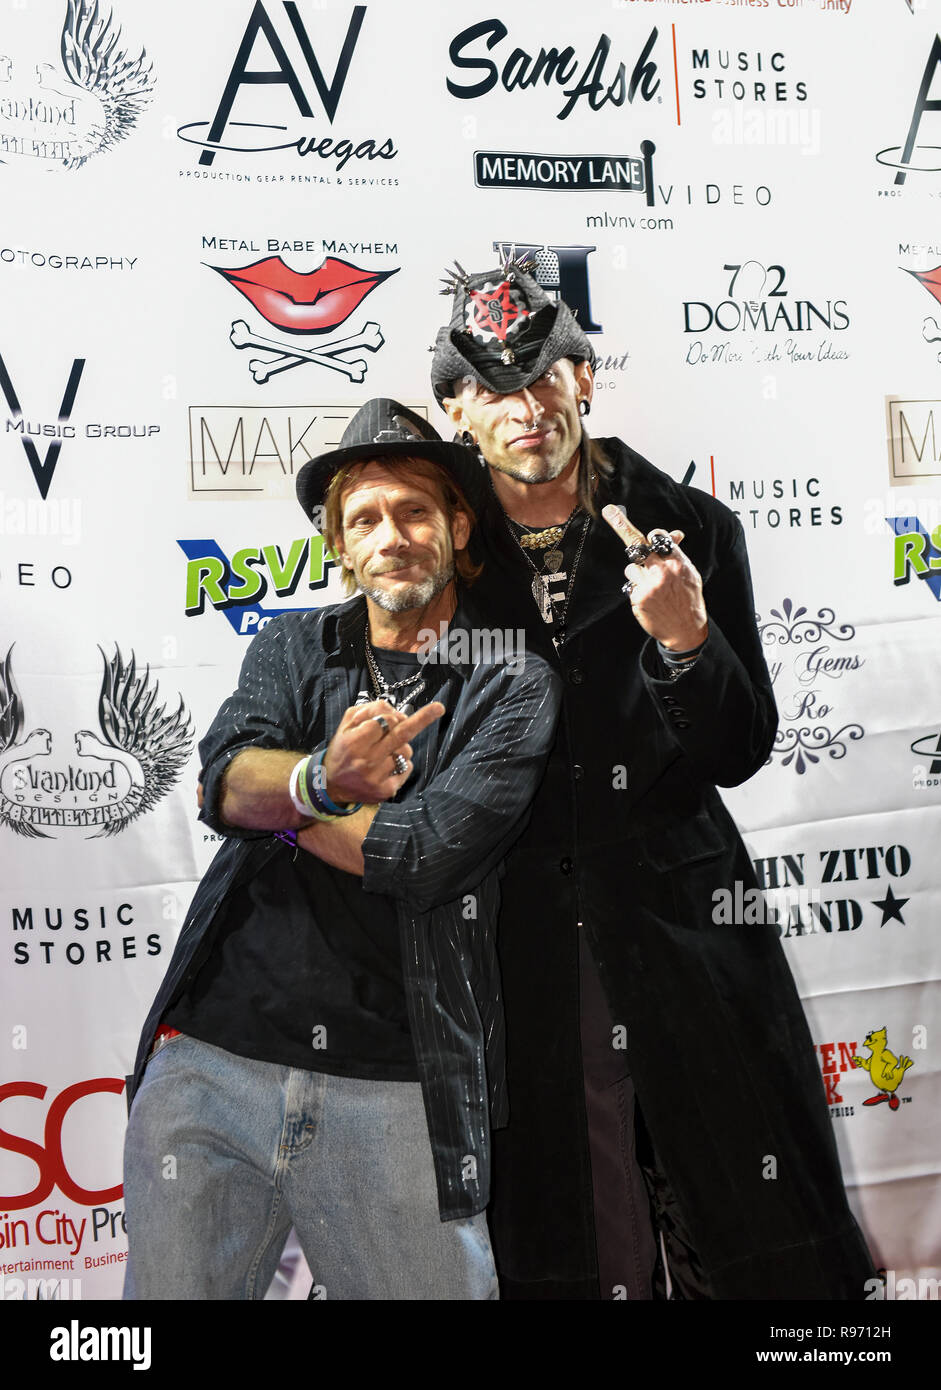 Las Vegas, Nevada, December 19th, Sin City Presents Magazine hosted the Las Vegas Shredder of the Year Awards at Counts Vamp'd Rock and Roll Bar with red carpet and music performances by John Zito Band and many of Las Vegas' best rock music musicians.  Credit: Ken Howard/Alamy Live News Stock Photo